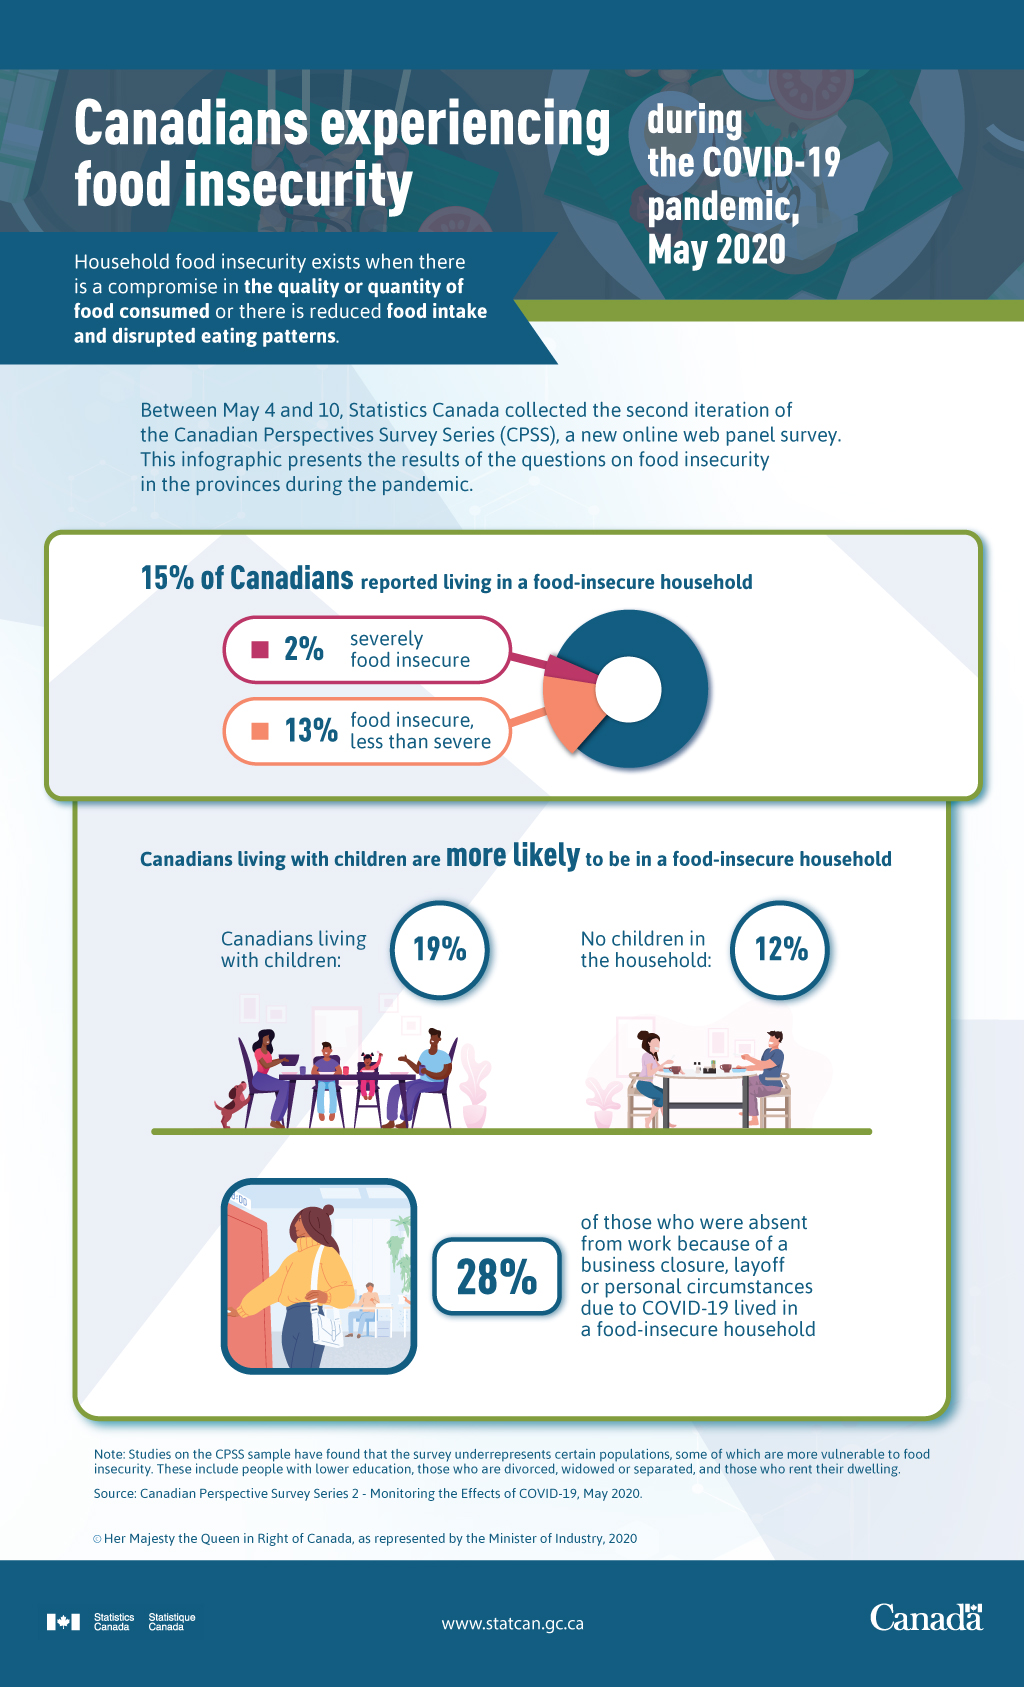 Infographic: Canadians experiencing food insecurity during the COVID-19 pandemic, May 2020